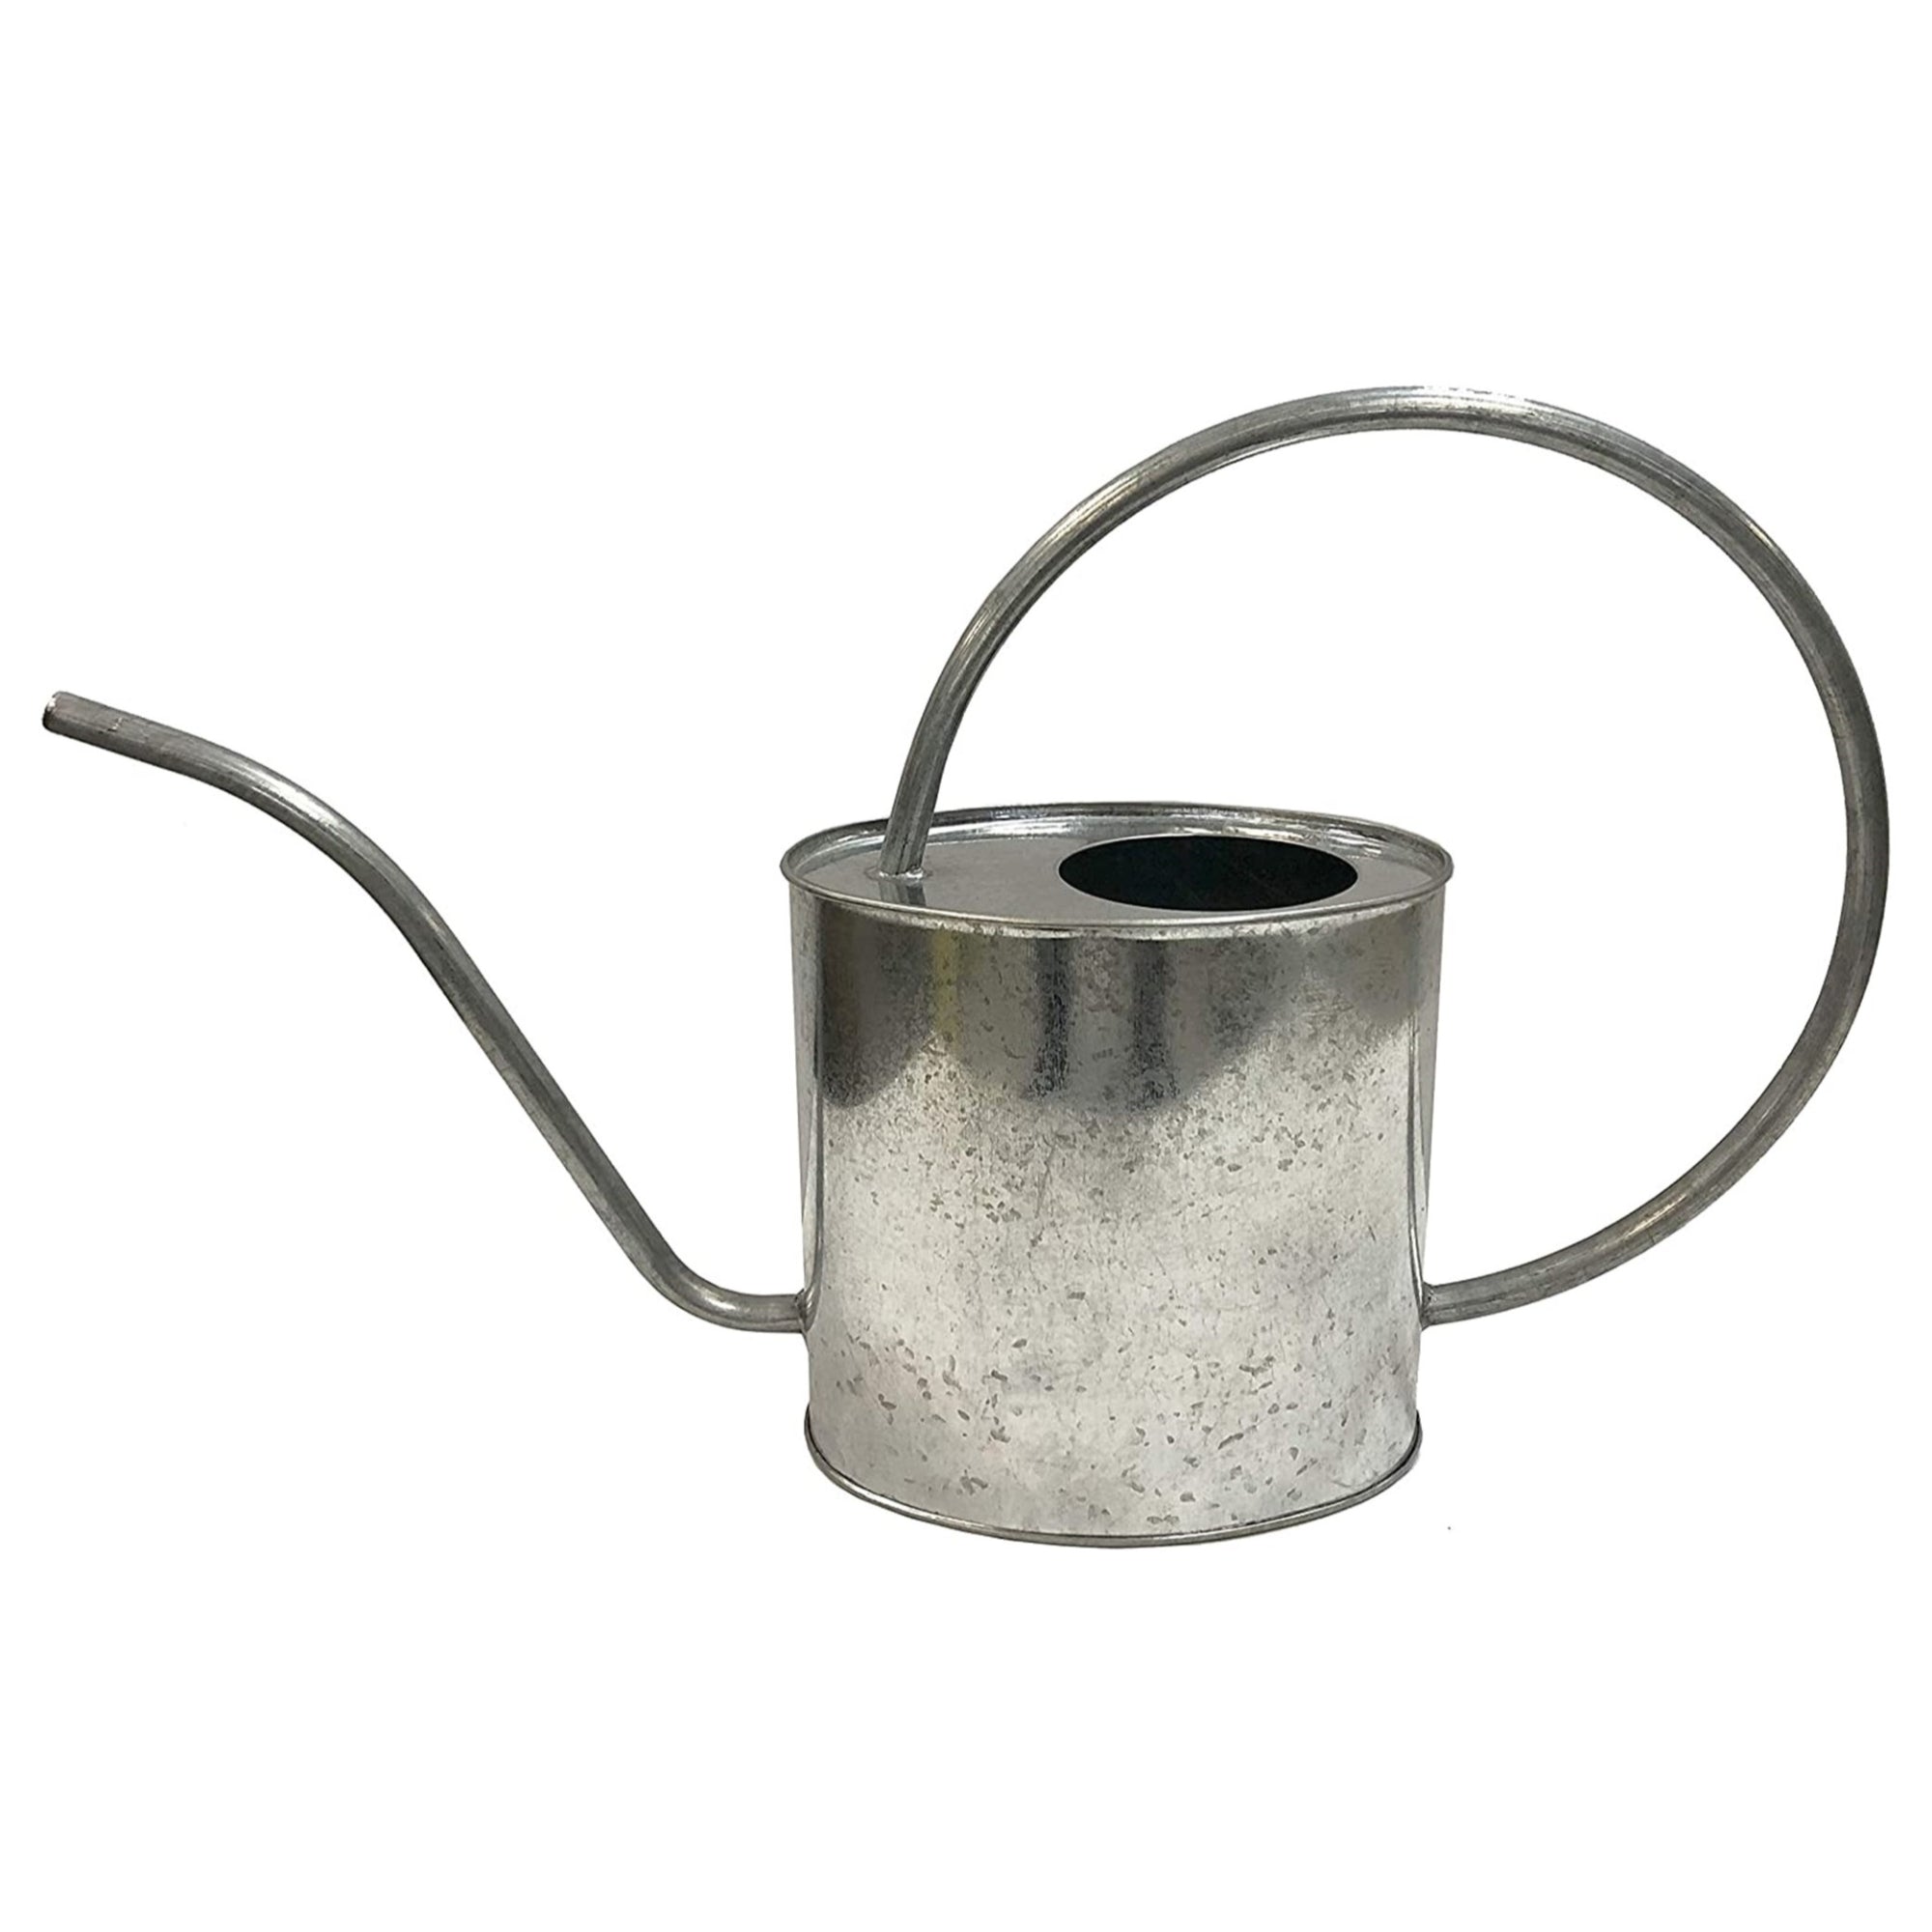 Gardener Select Metal Oval Watering Can, Galvanized, 2L (0.5 gallons)